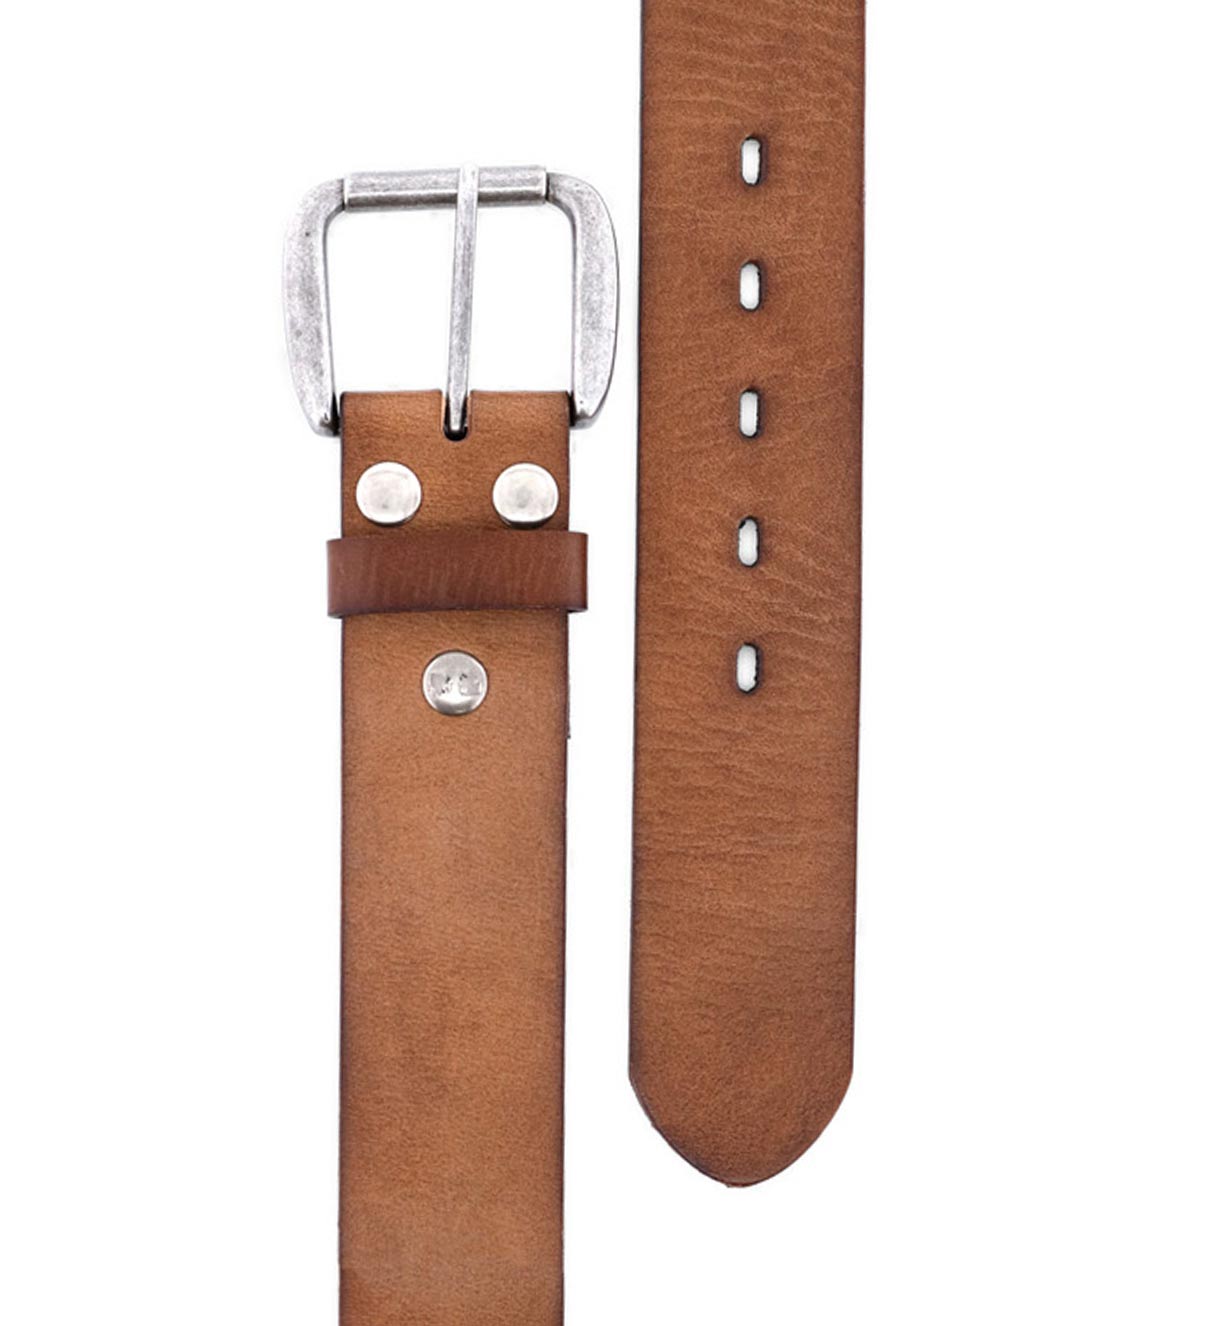 A Hobo tan leather belt with a metal buckle from Bed Stu.